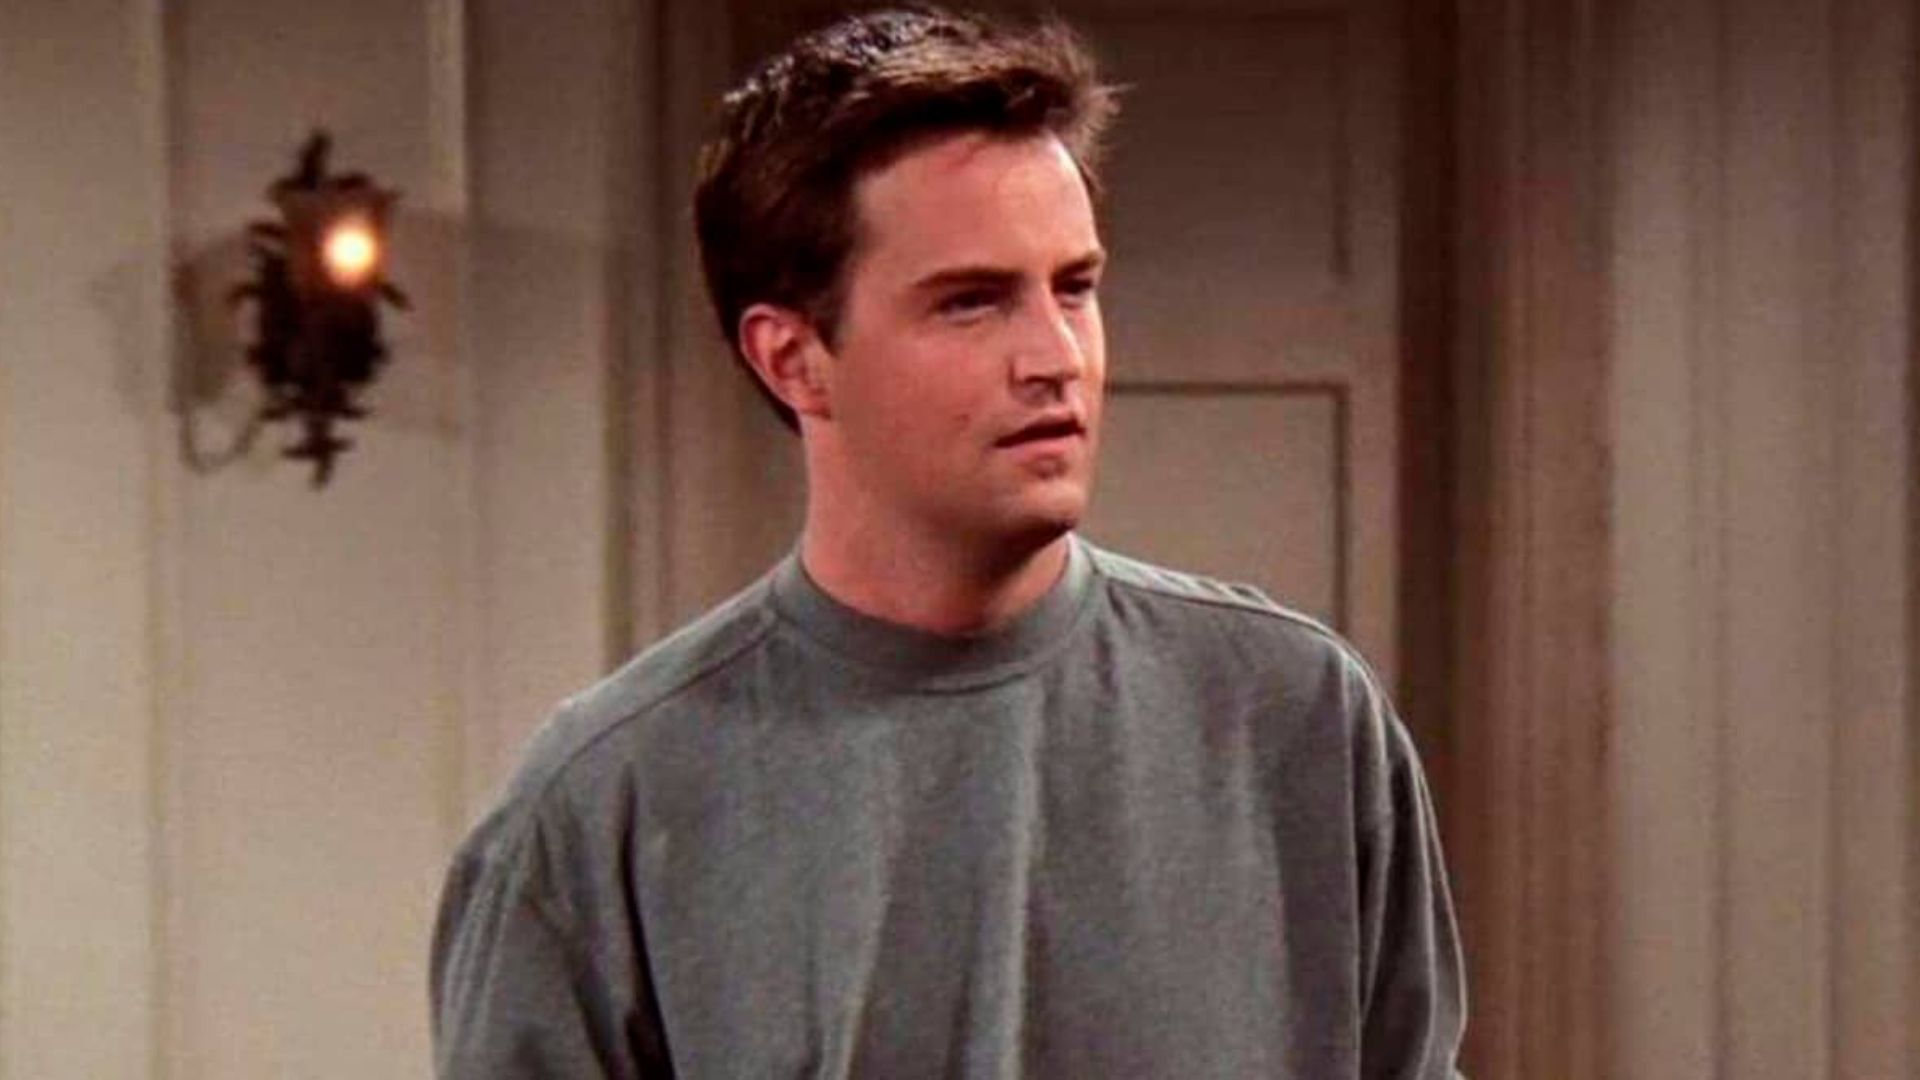 Friends Actress Says Matthew Perry Convinced Screenwriters To Change Hot Sex Picture